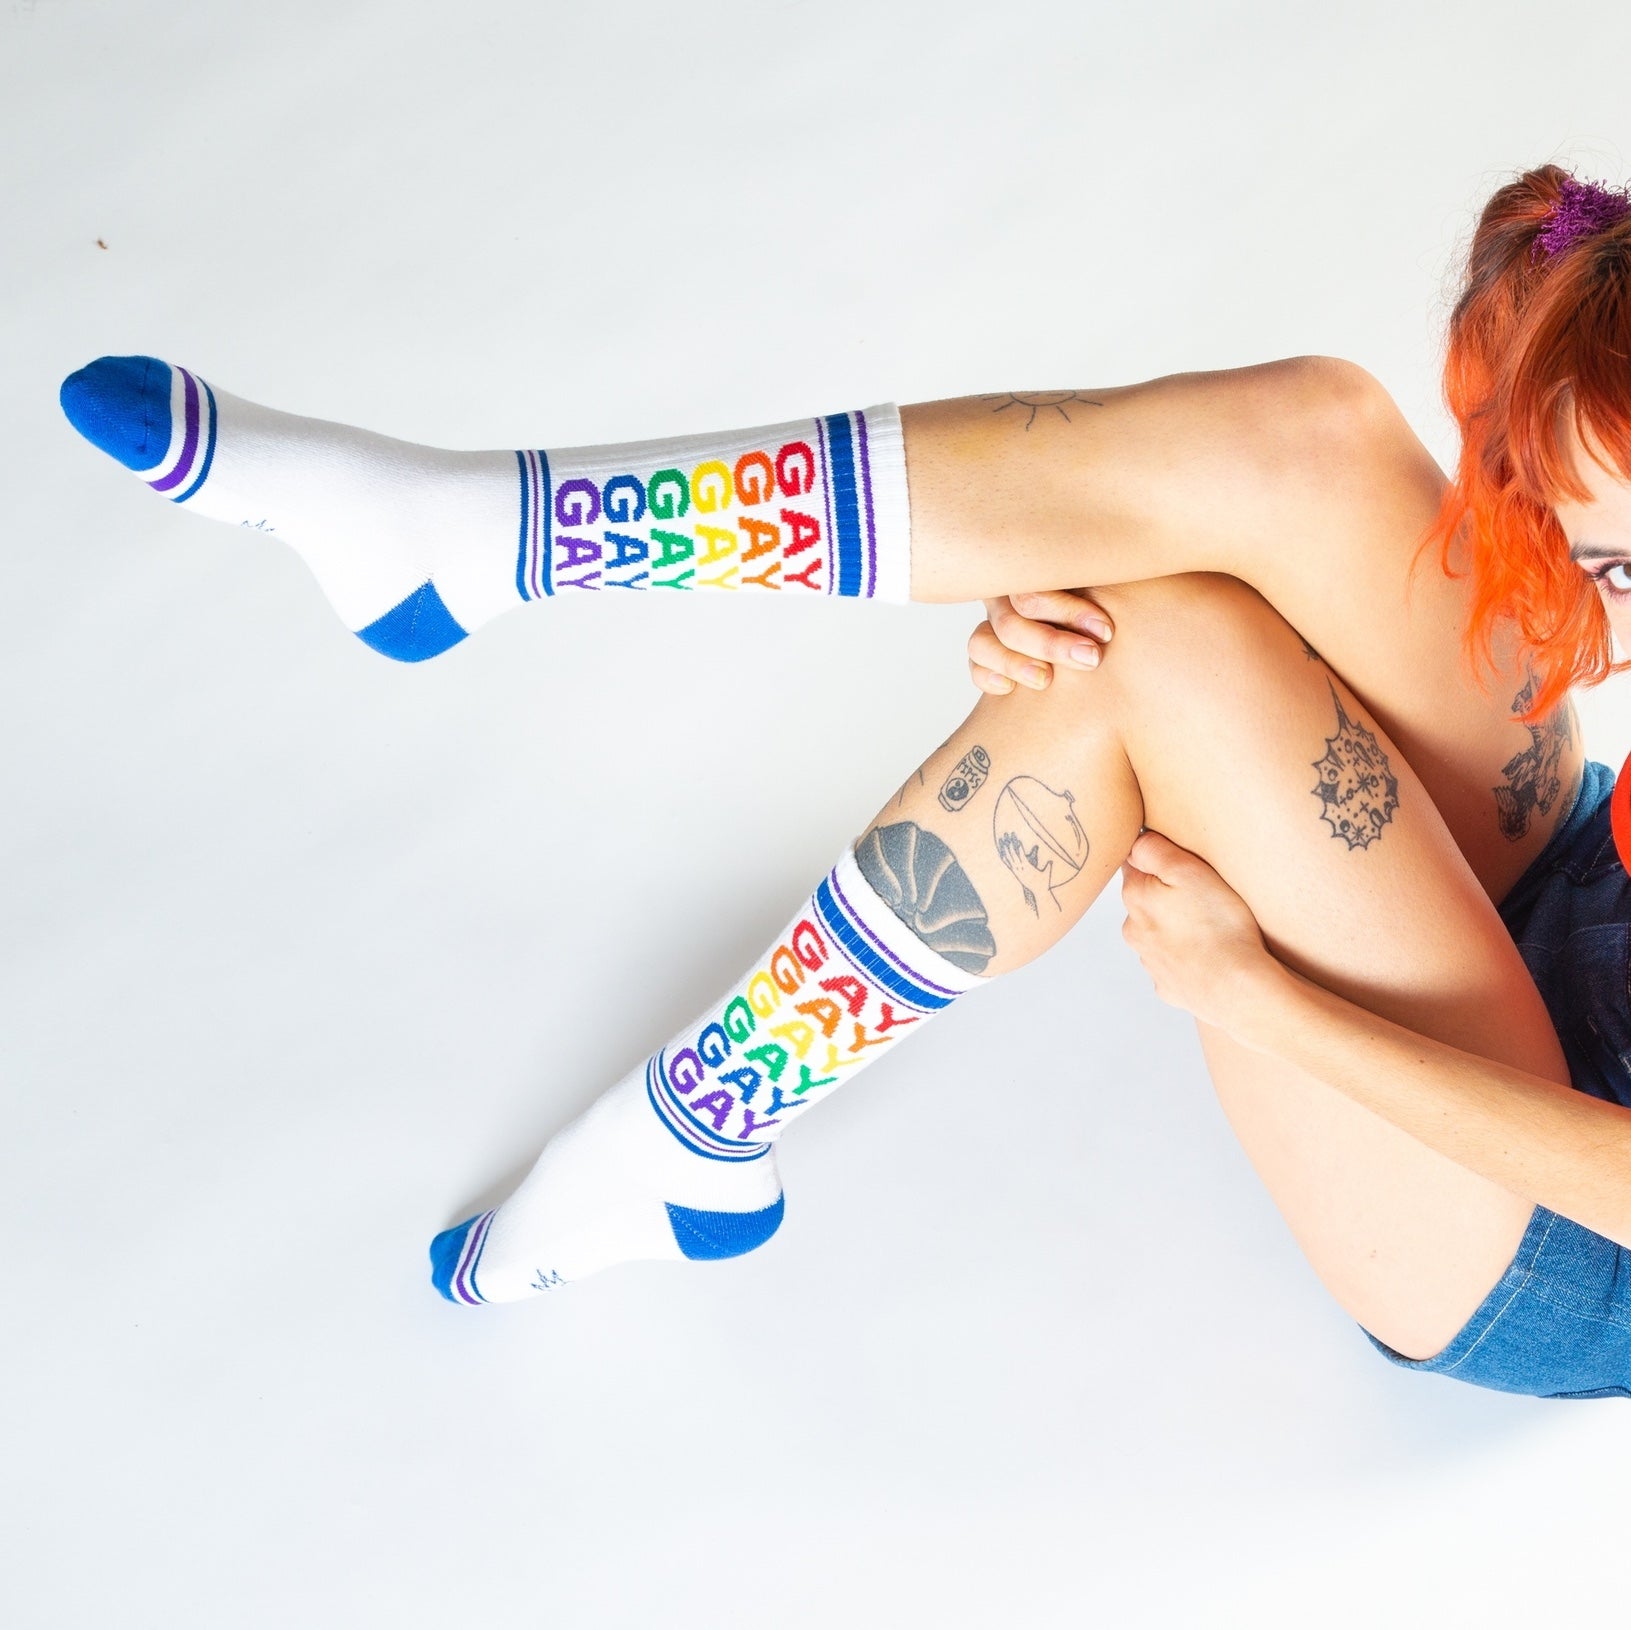 Statement Socks by Gumball Poodle